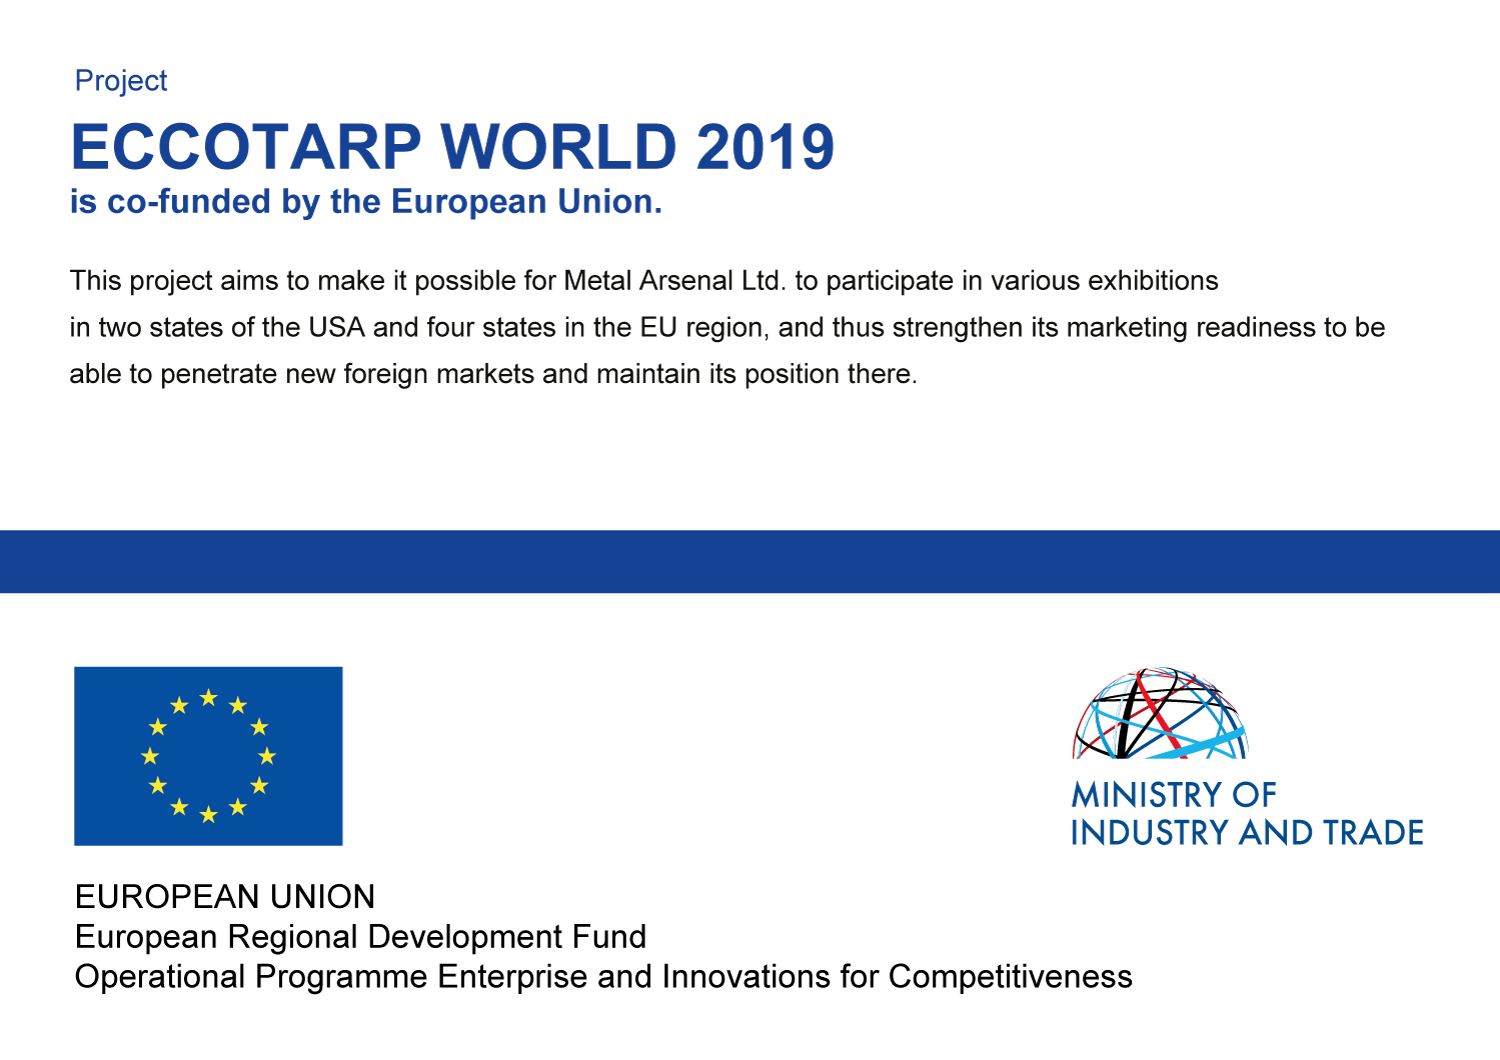 ECCOTARP WORLD 2019 is co-funded by the European Union